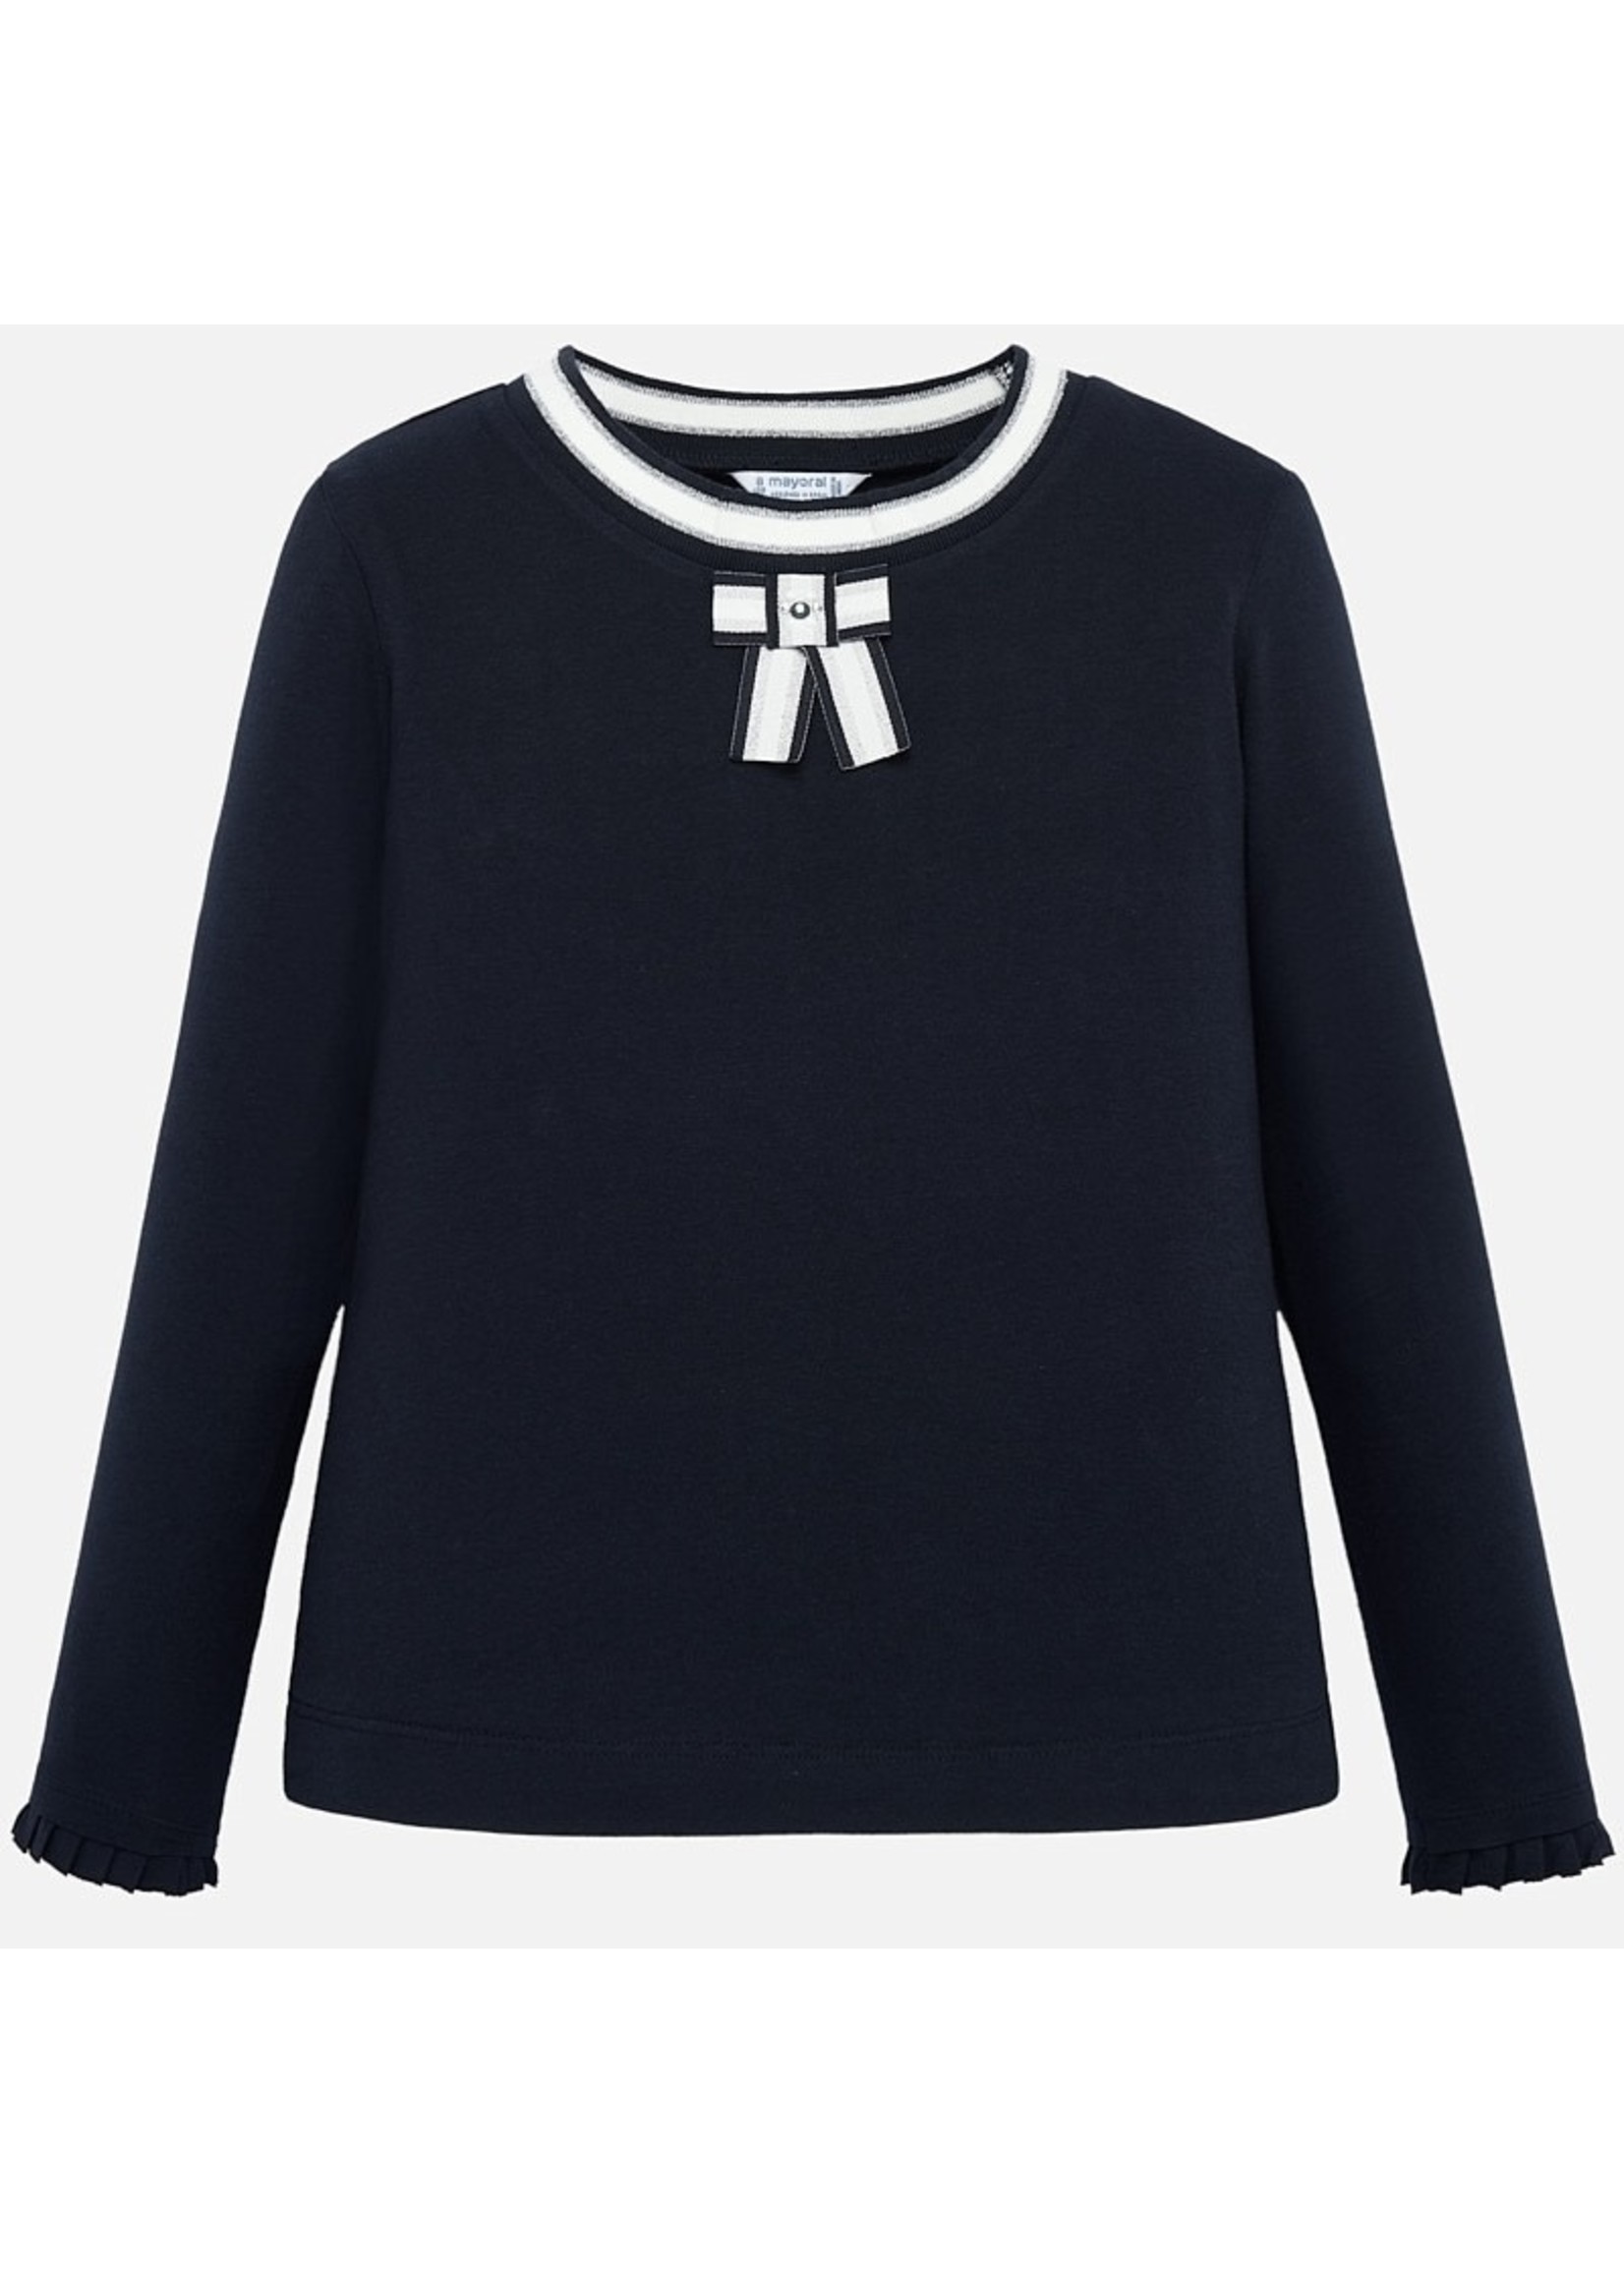 Mayoral Mayoral L/s t-shirt with applique Navy - 07007